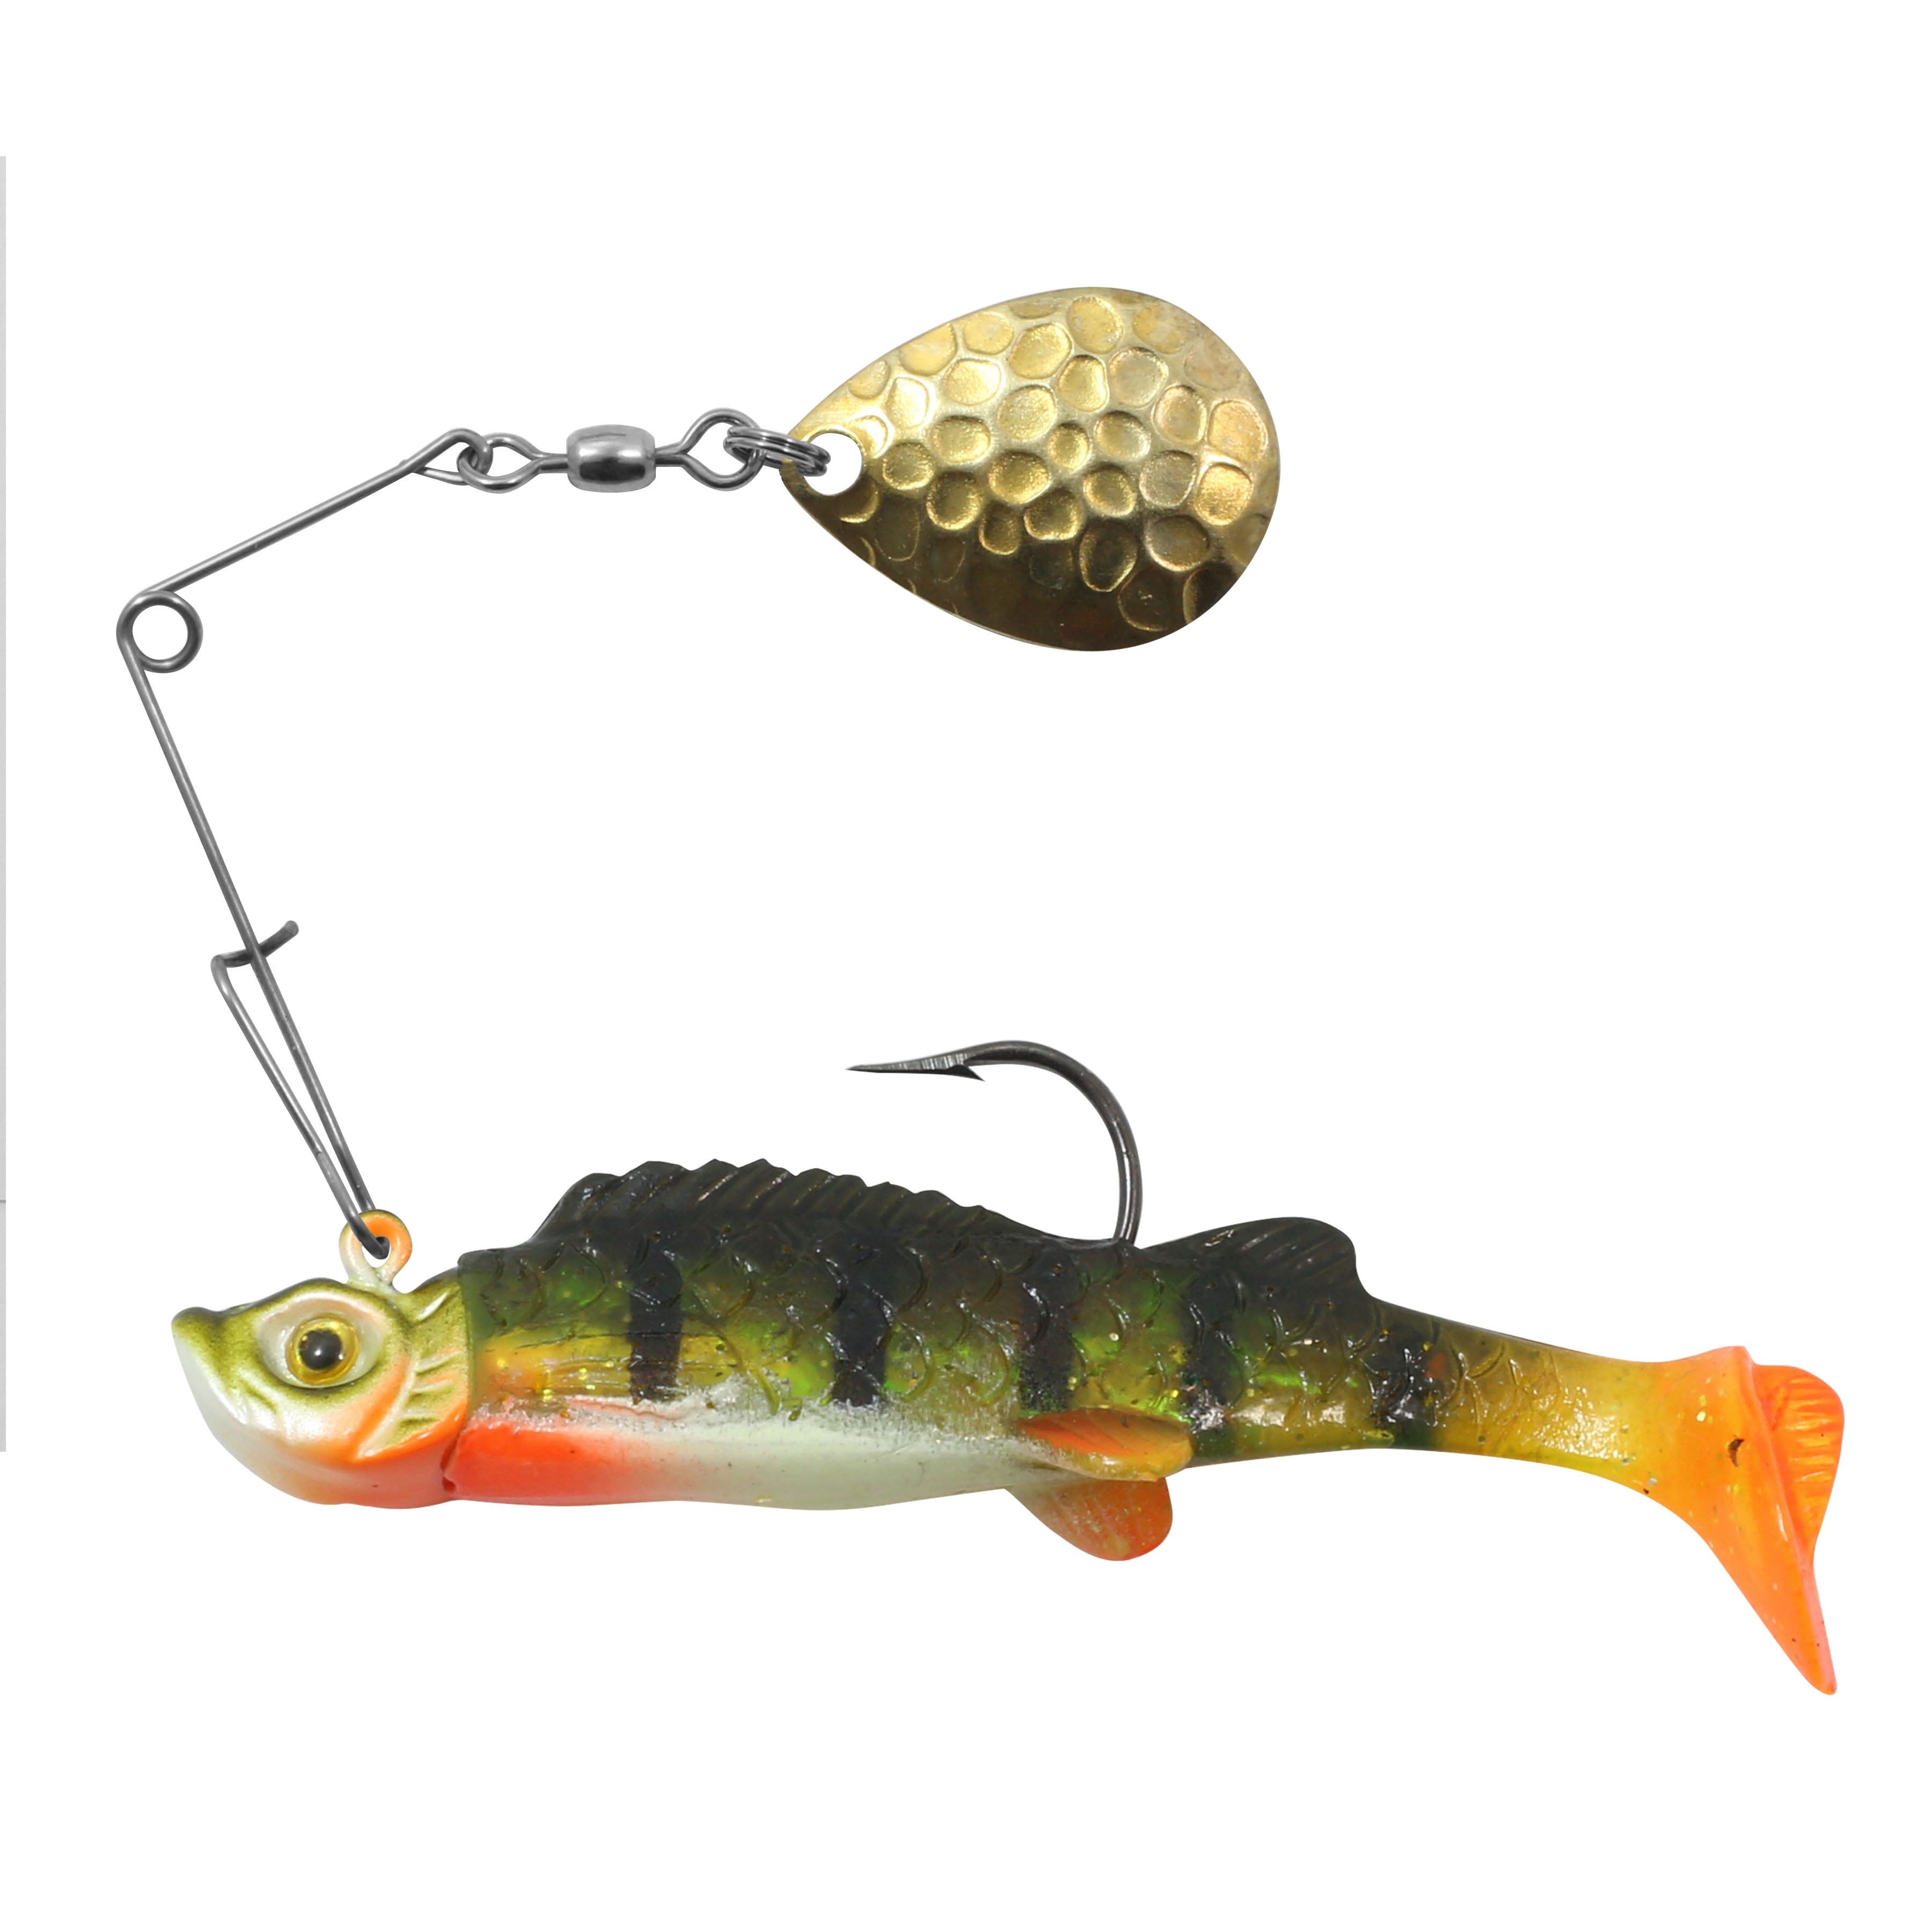 Northland Tackle Mimic Minnow Spin, Spin Jig and Tail, Freshwater